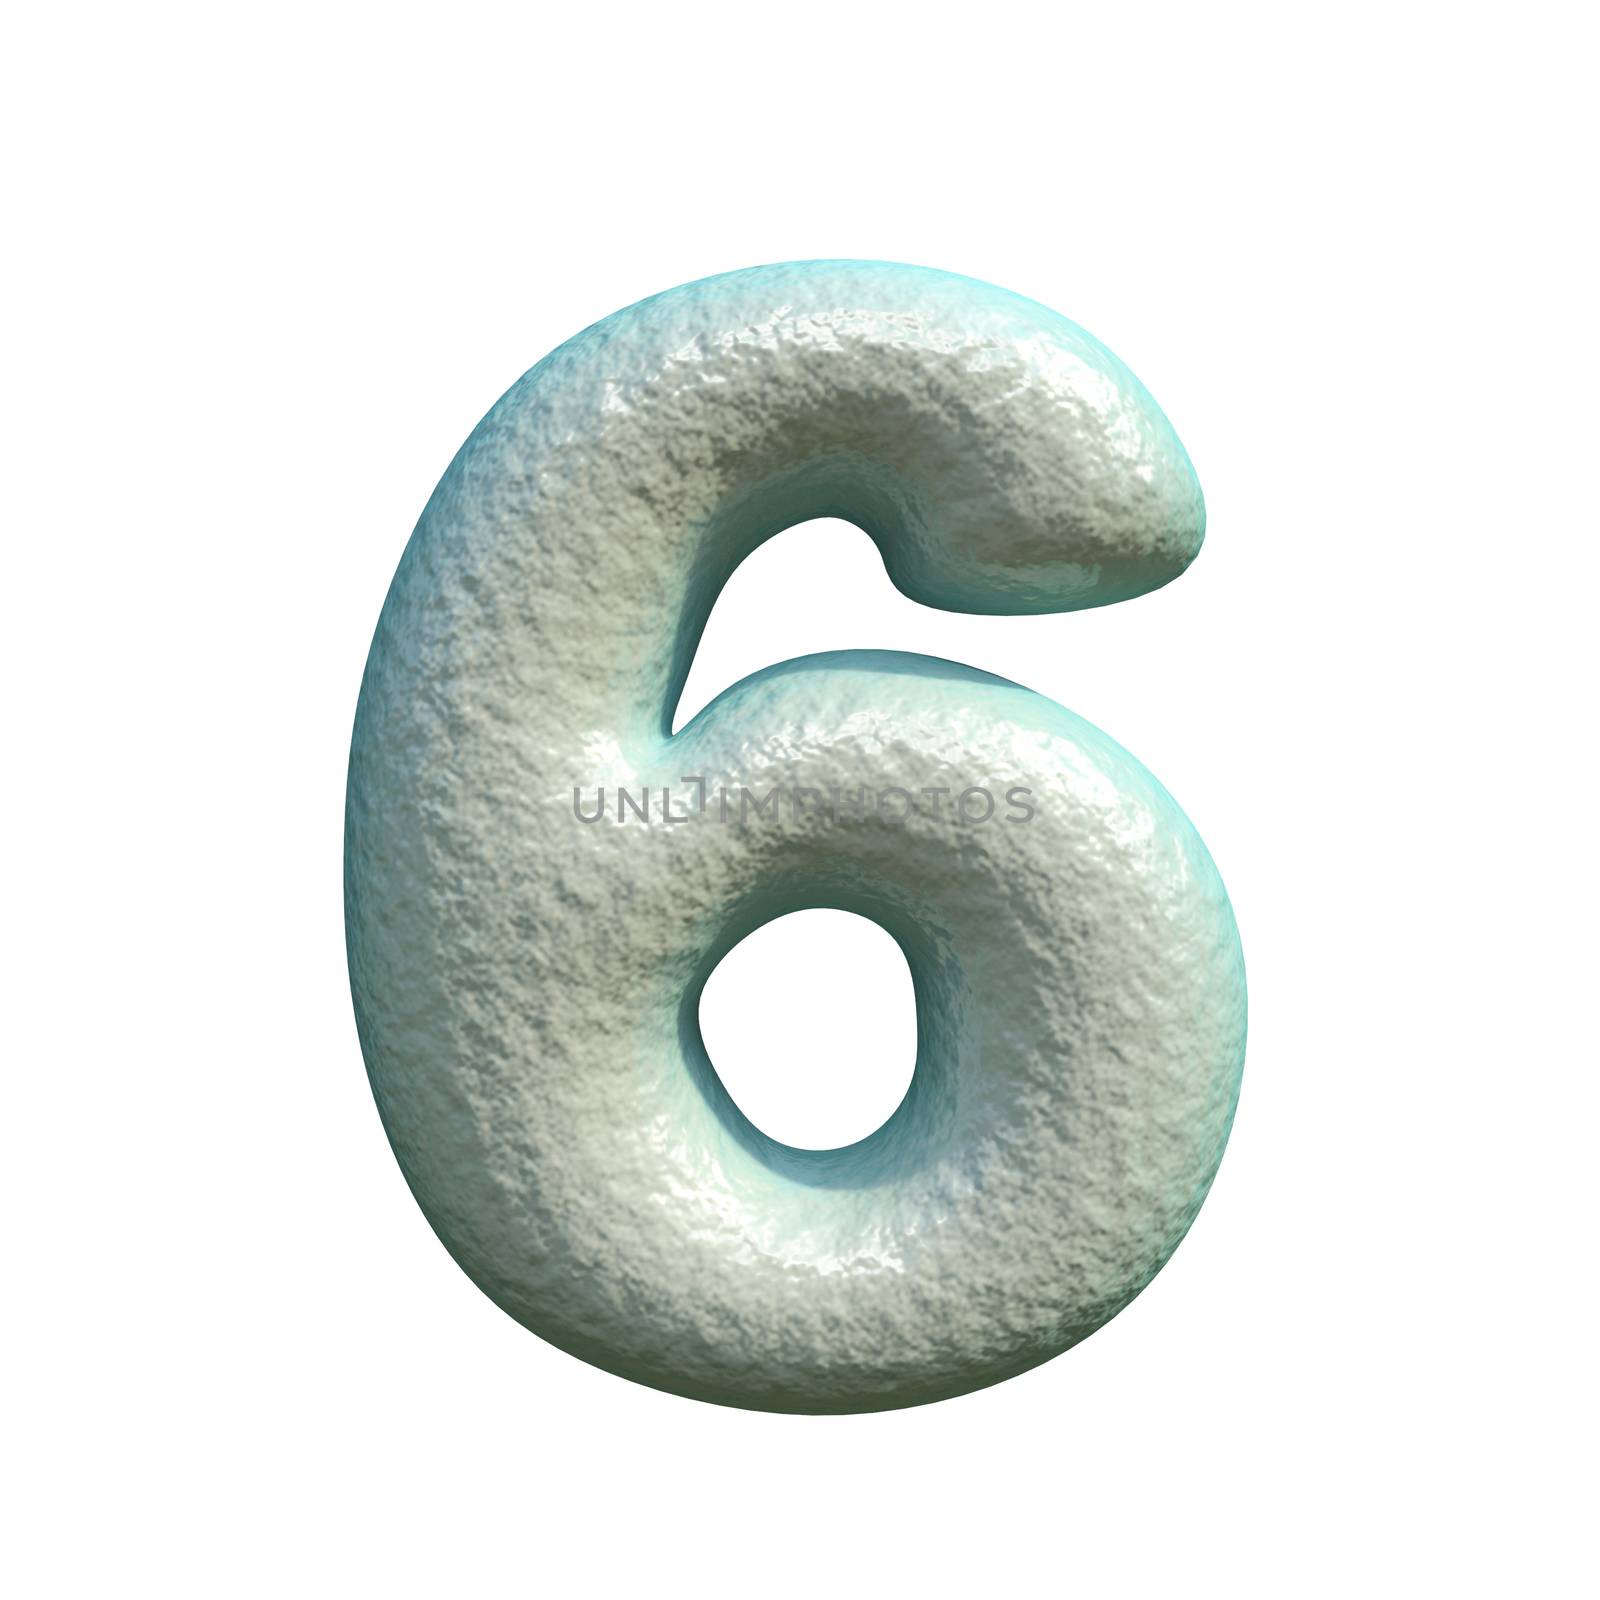 Grey blue clay Number 6 SIX 3D rendering illustration isolated on white background